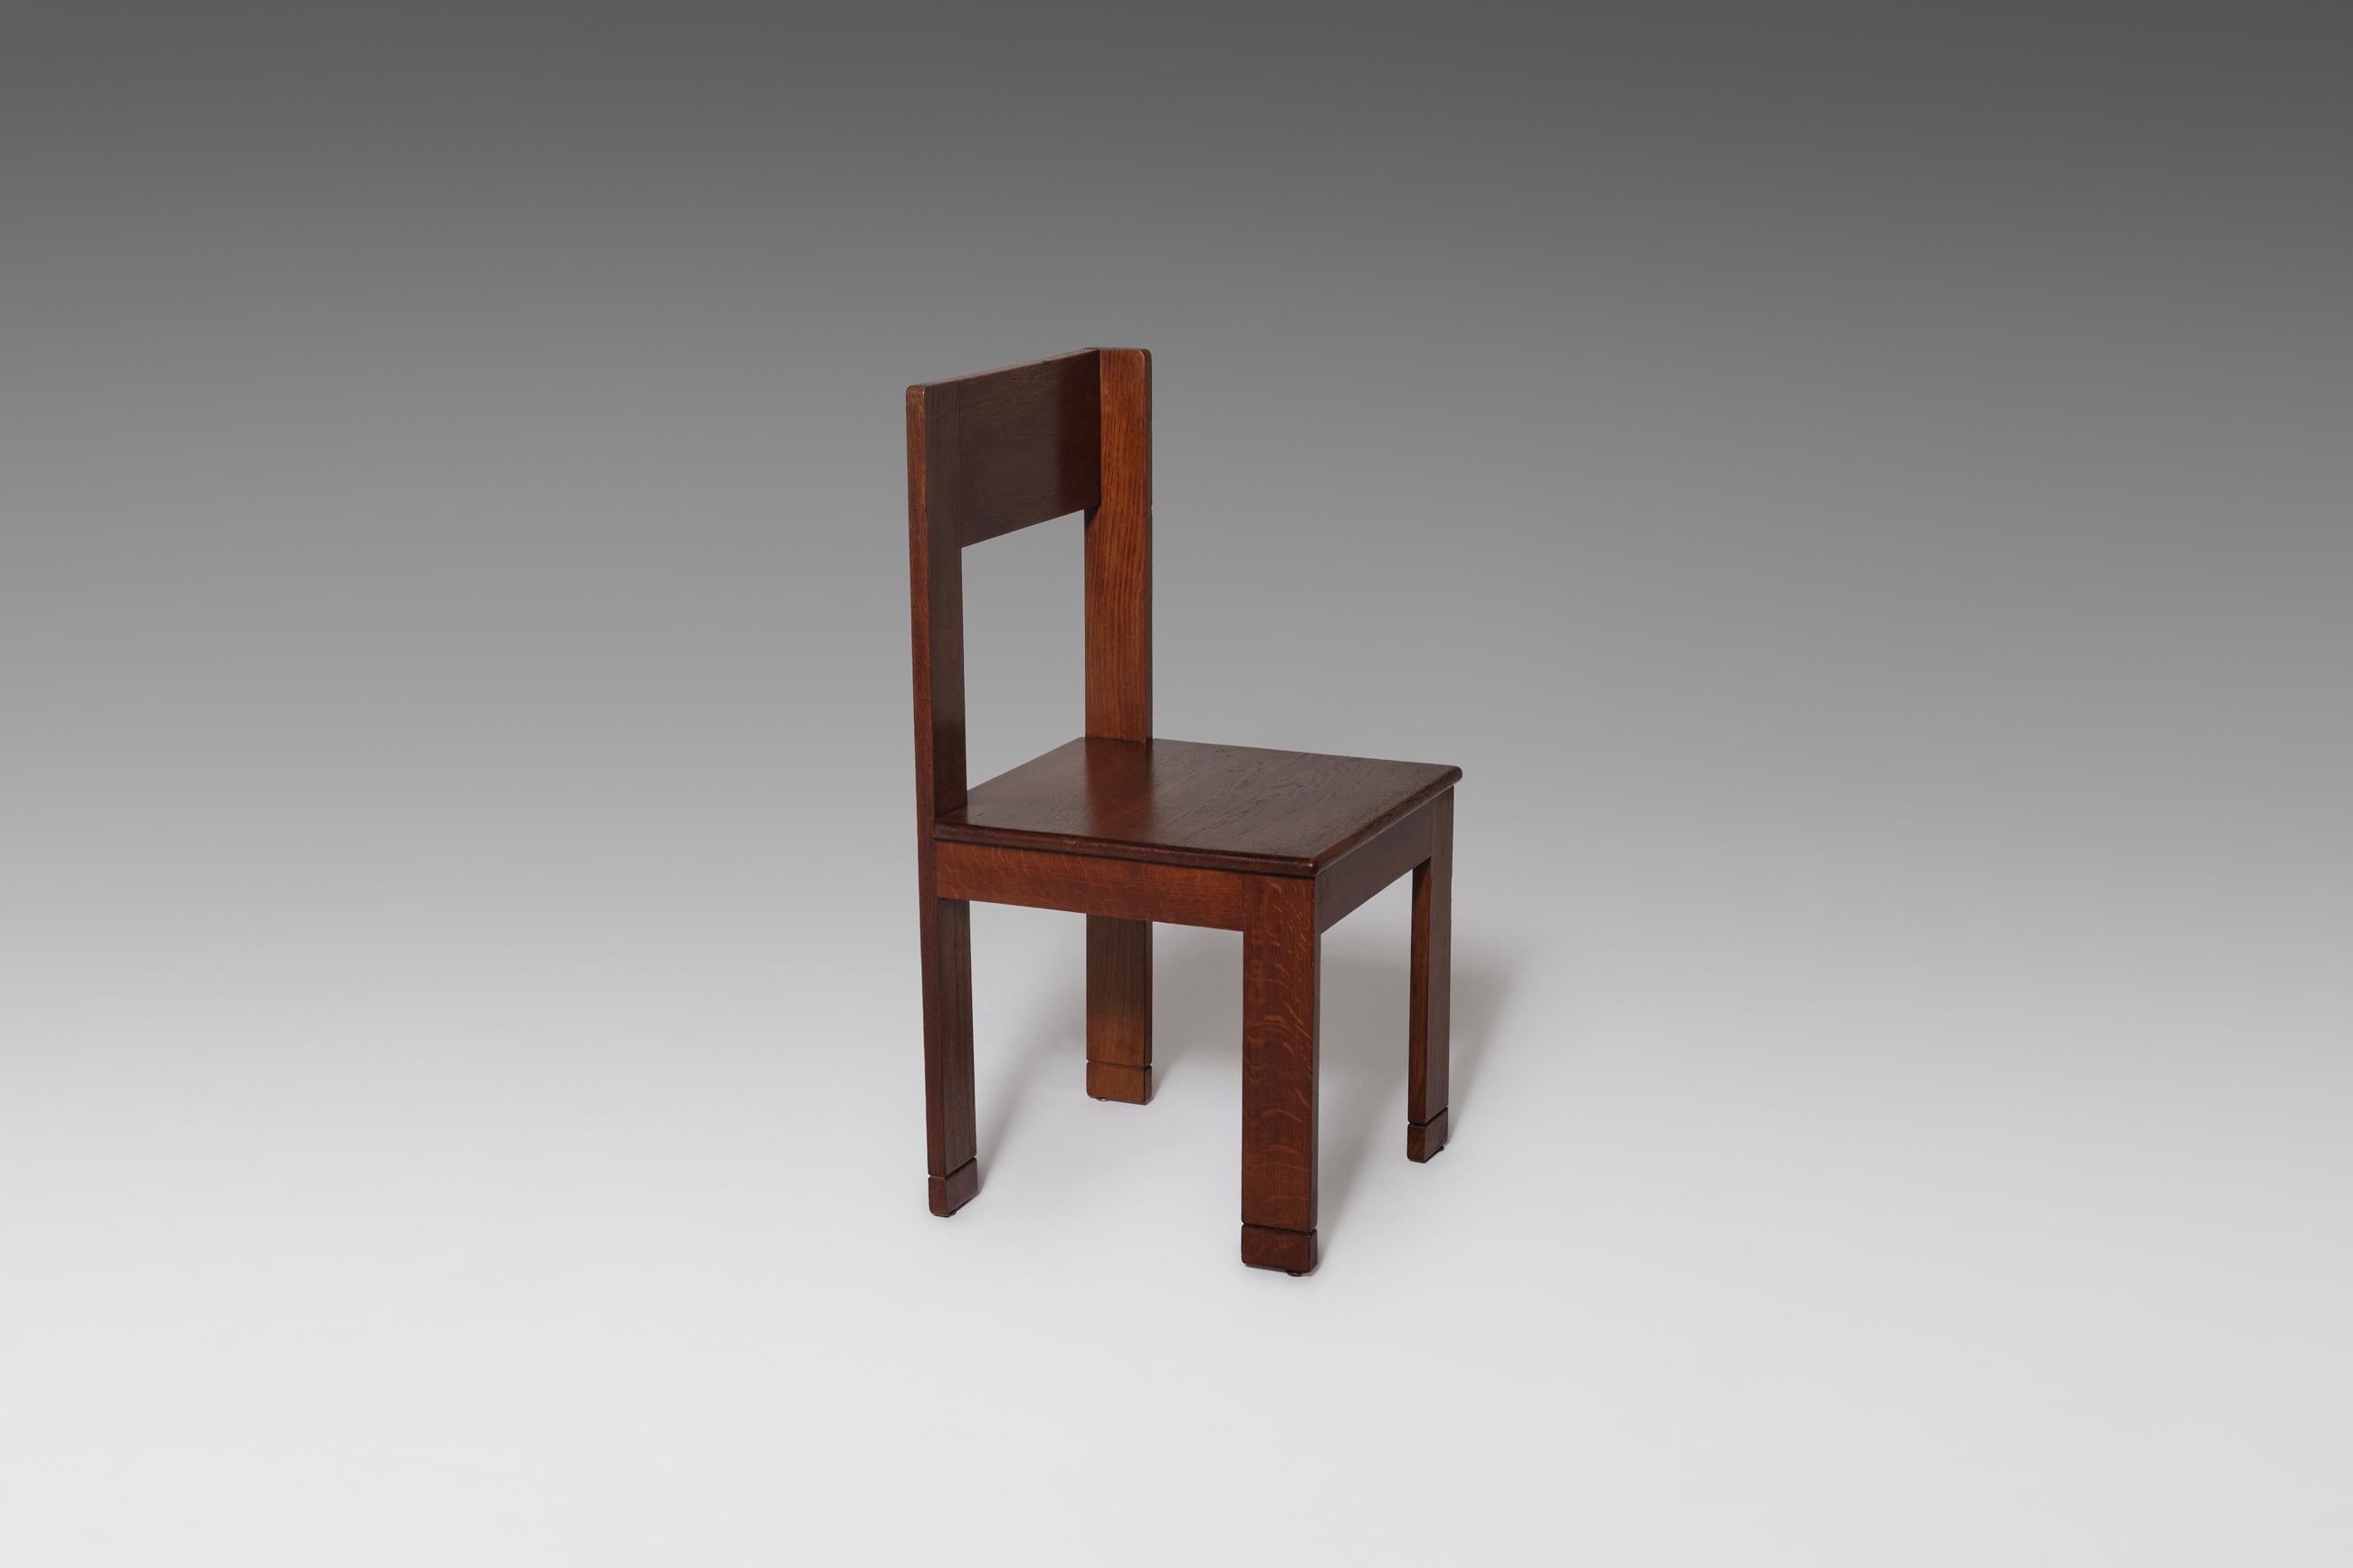 Rare modernist side chair by L.O.V. Oosterbeek, the Netherlands, 1921. L.O.V. is an abbreviation of Labor Onia Vincit which means 'Work conquers all'. Designed most probably by Fritz Spanjaard who became the artistic director of L.O.V. in 1919. The